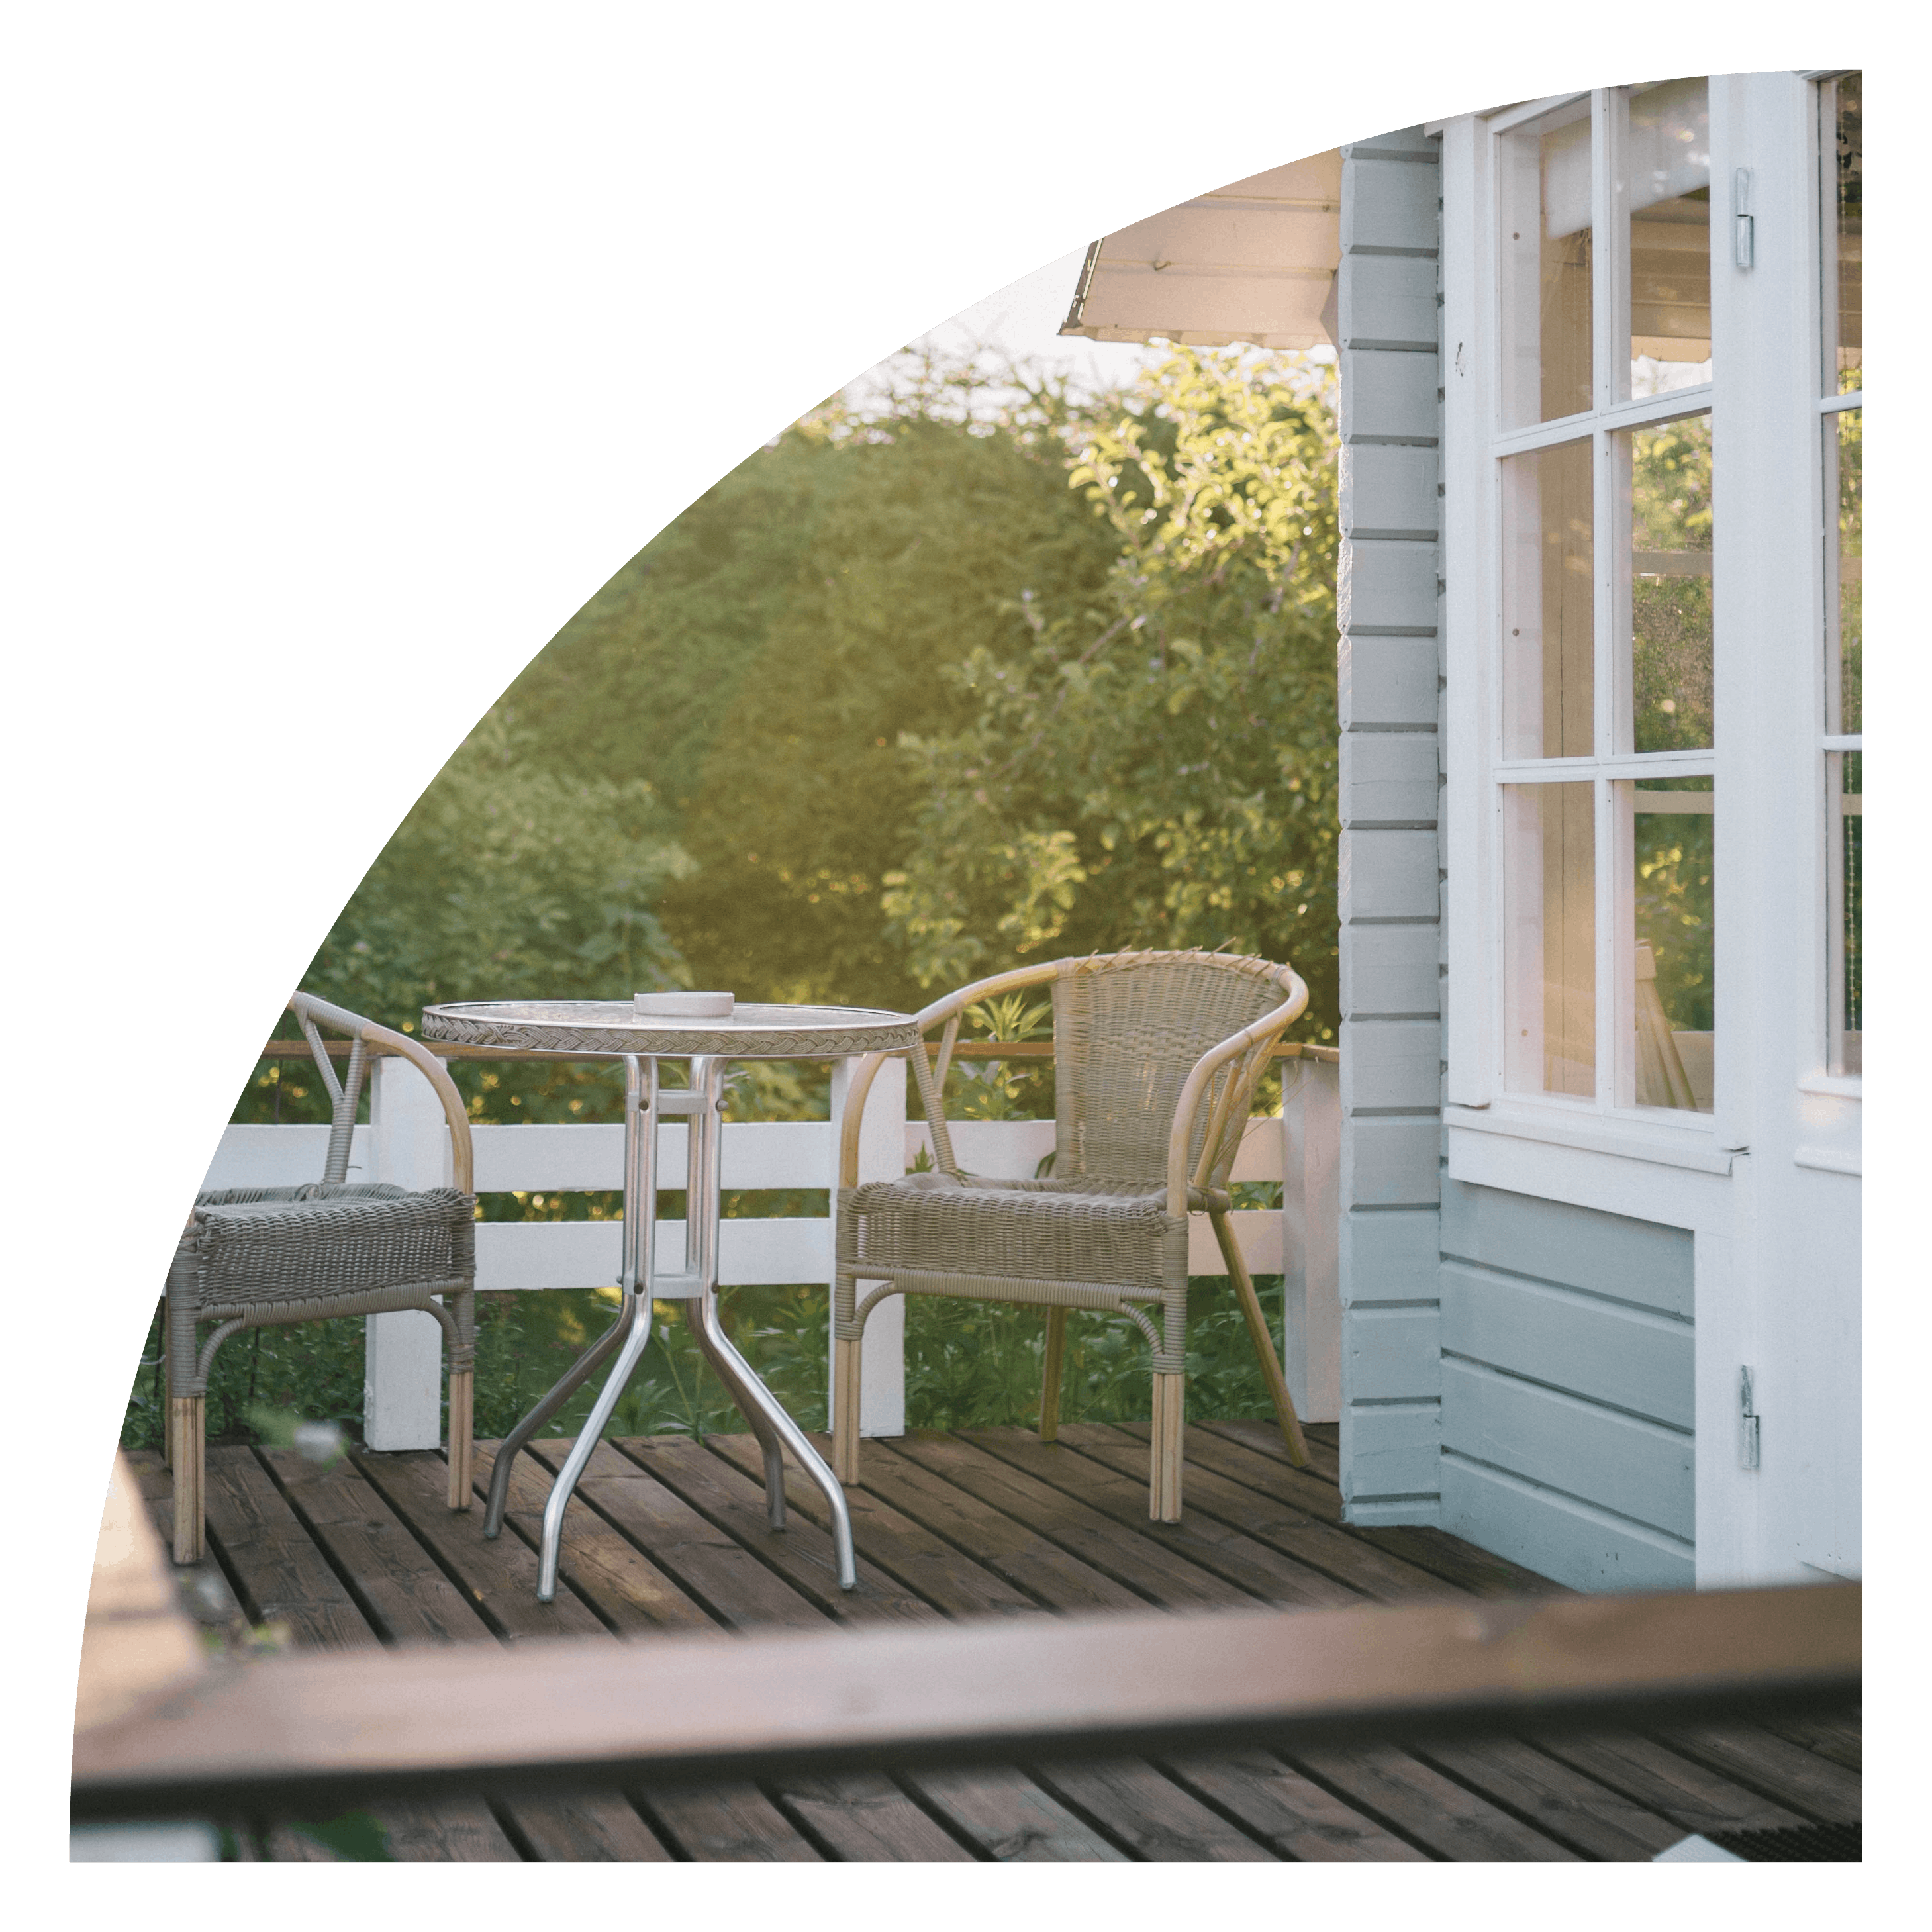 A porch with two chairs and a table